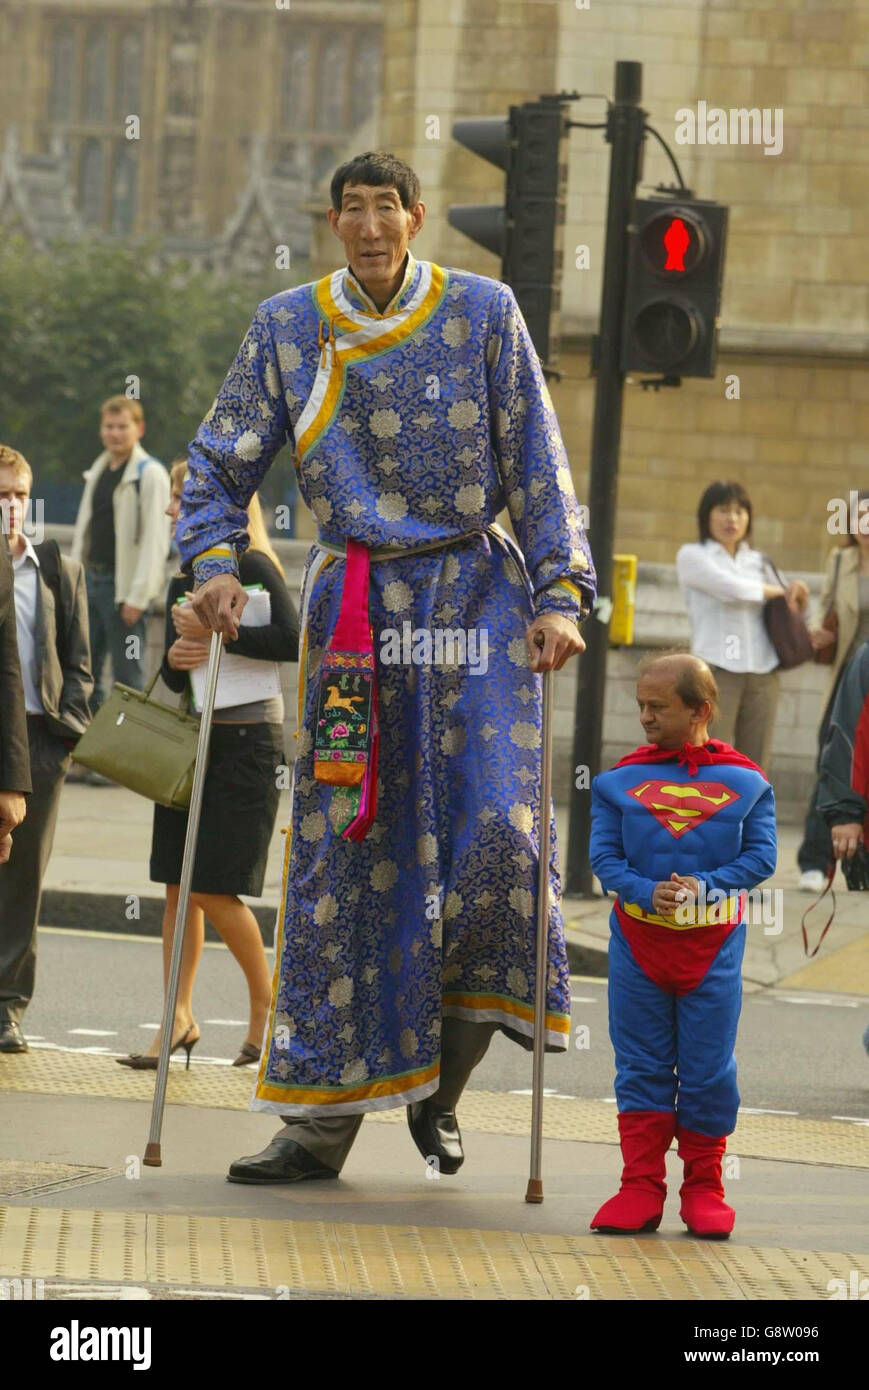 The tallest man in the world, Xi Shun who stands at 7ft 8.59in / 2m 36.1cm meets Kiran Shah, who at 4ft 1.7in / 1m 26.3cm is the shortest professional stuntman in the world, at the launch of the 2006 version of the Guinness World Records in Parliament Square, central London, Thursday September 22, 2005. PRESS ASSOCIATION photo. Photo credit should read: Andrew Parsons/PA. Stock Photo